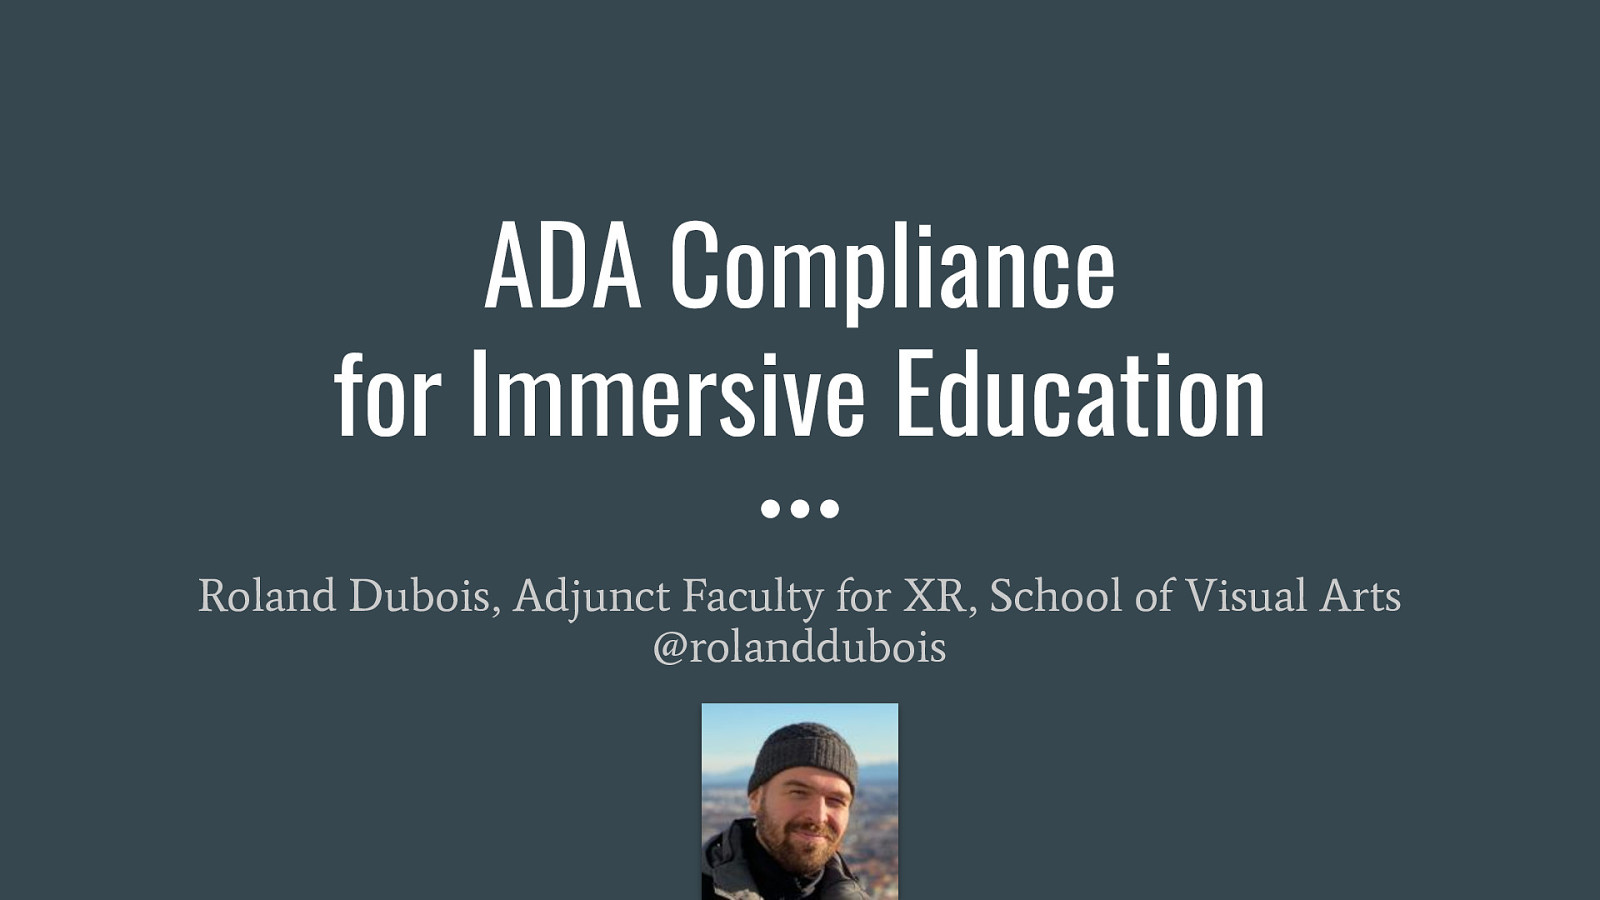 ADA Compliance for Immersive Education